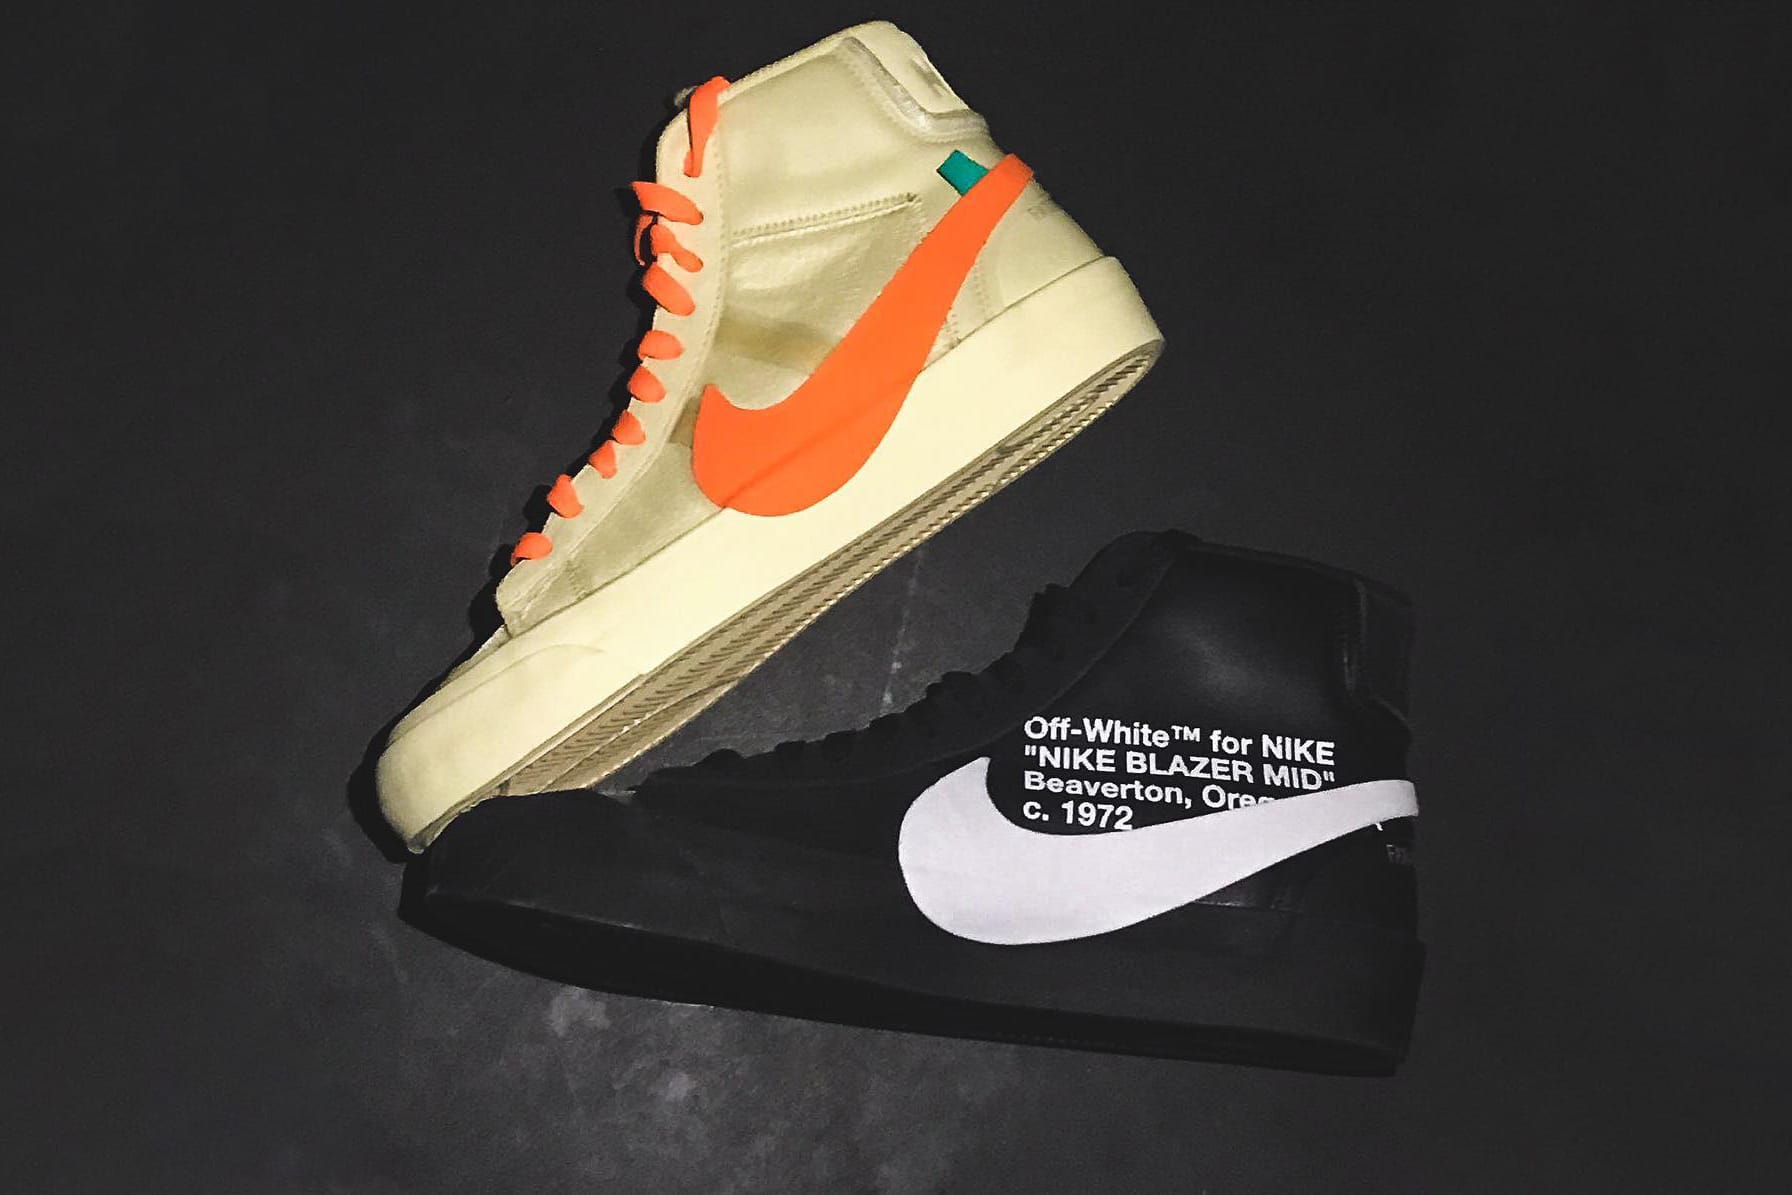 where to buy off white nike on release date